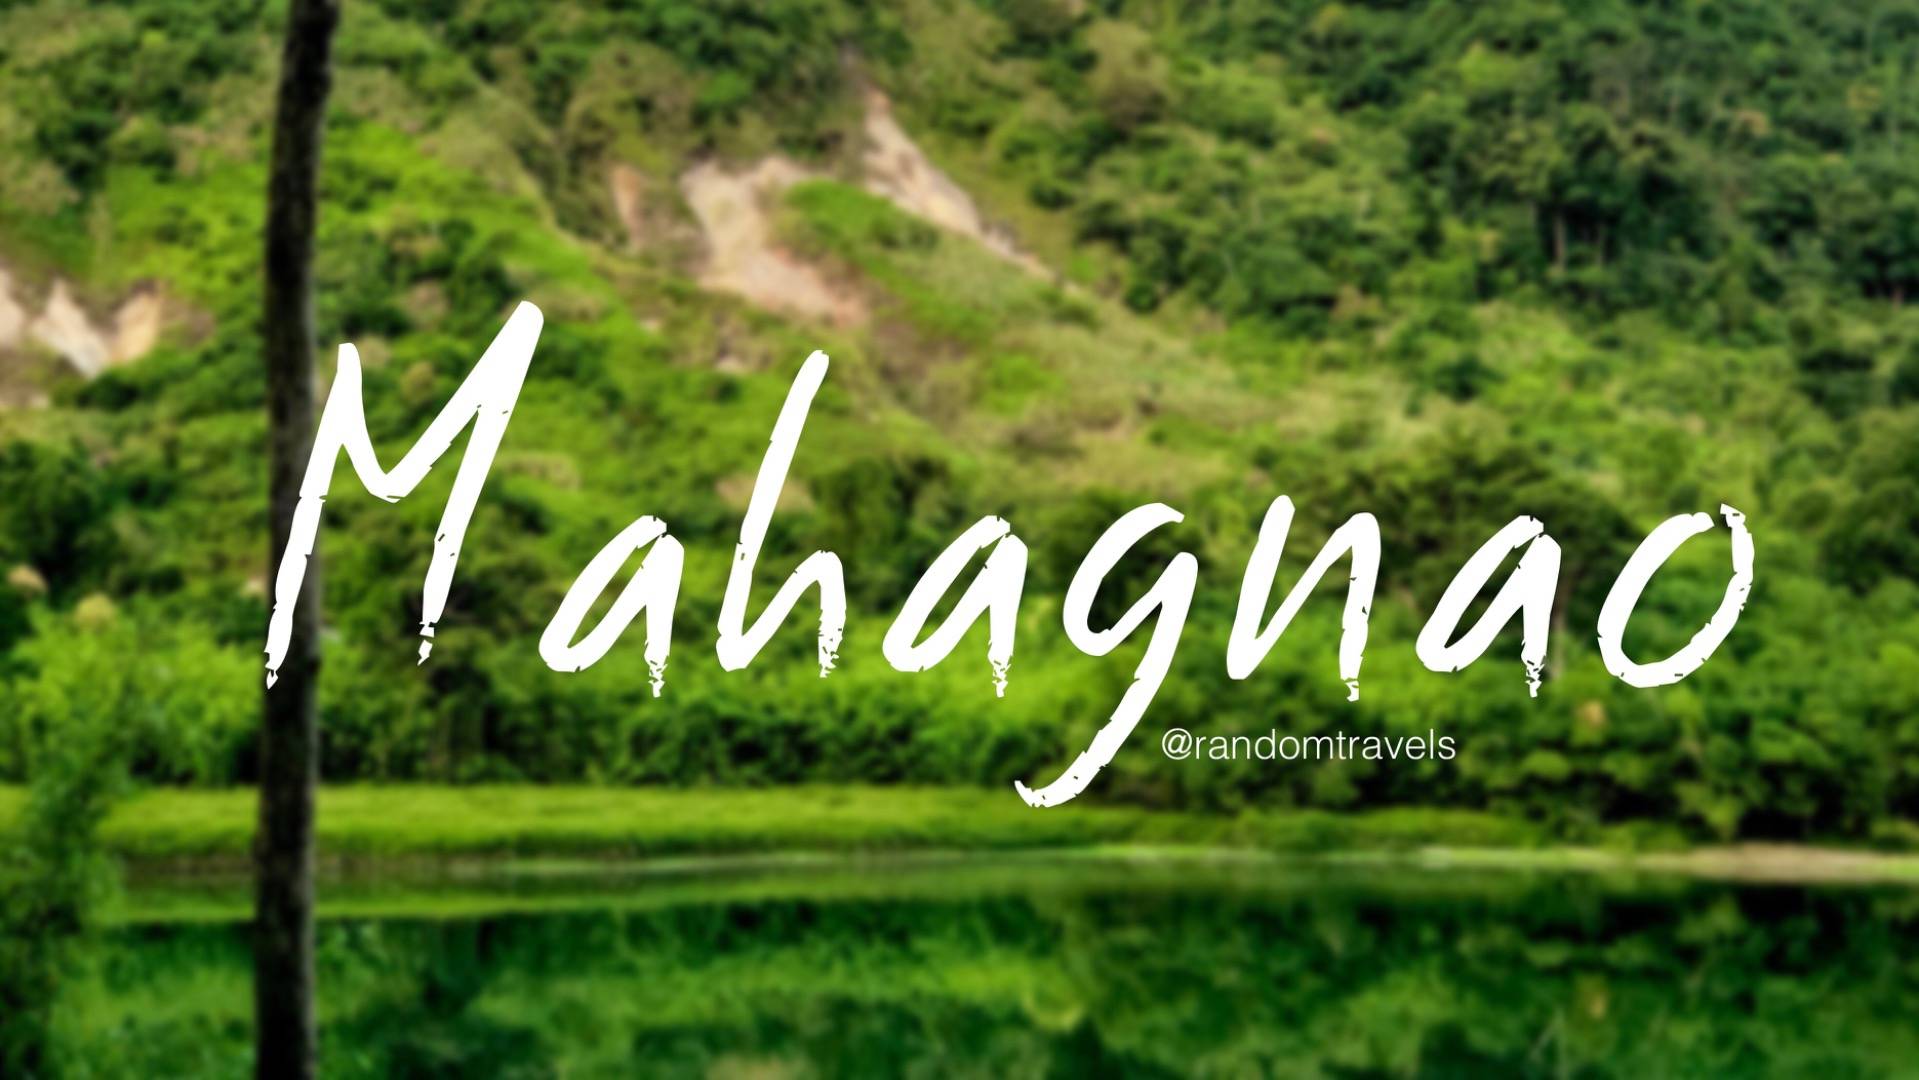 Mahagnao as a Sustainable Eco-tourism Site in the Spring Capital of Leyte